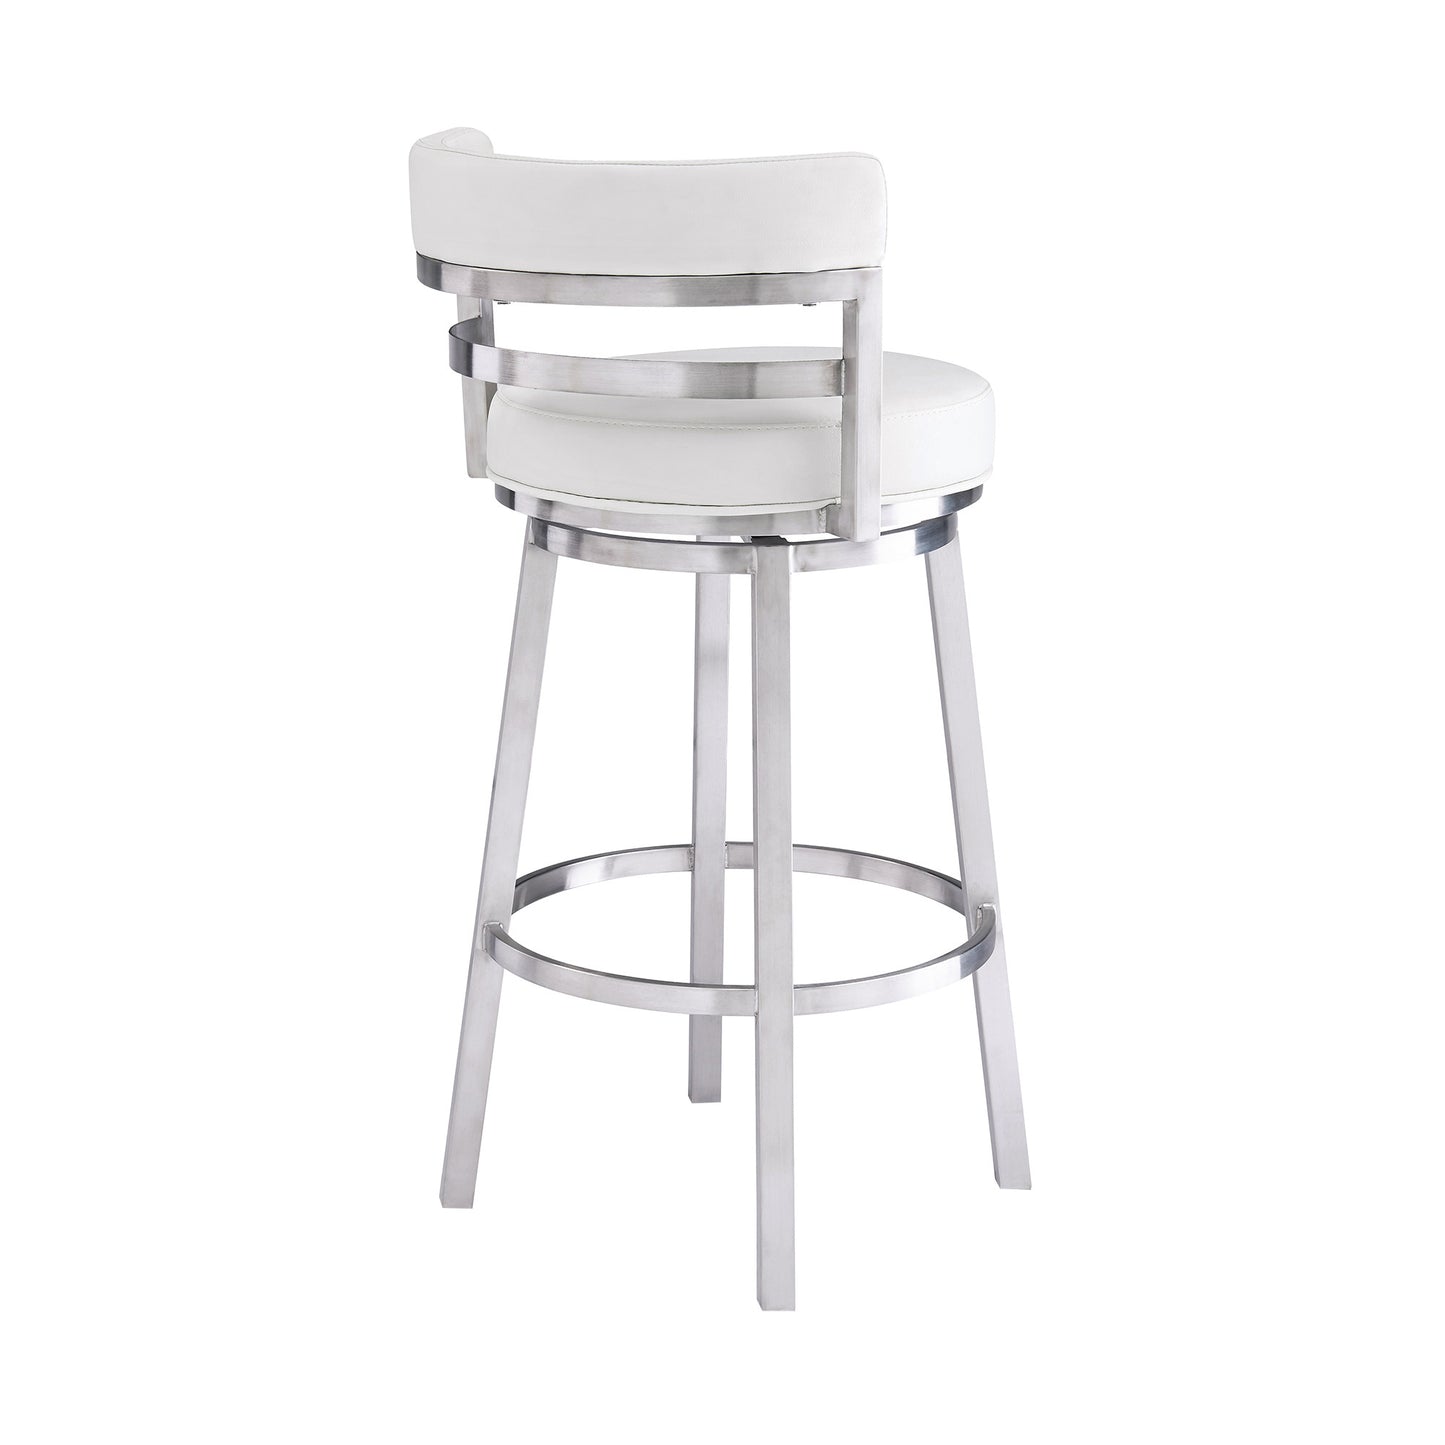 39" White And Silver Faux Leather Swivel Low Back Bar Height Chair With Footrest